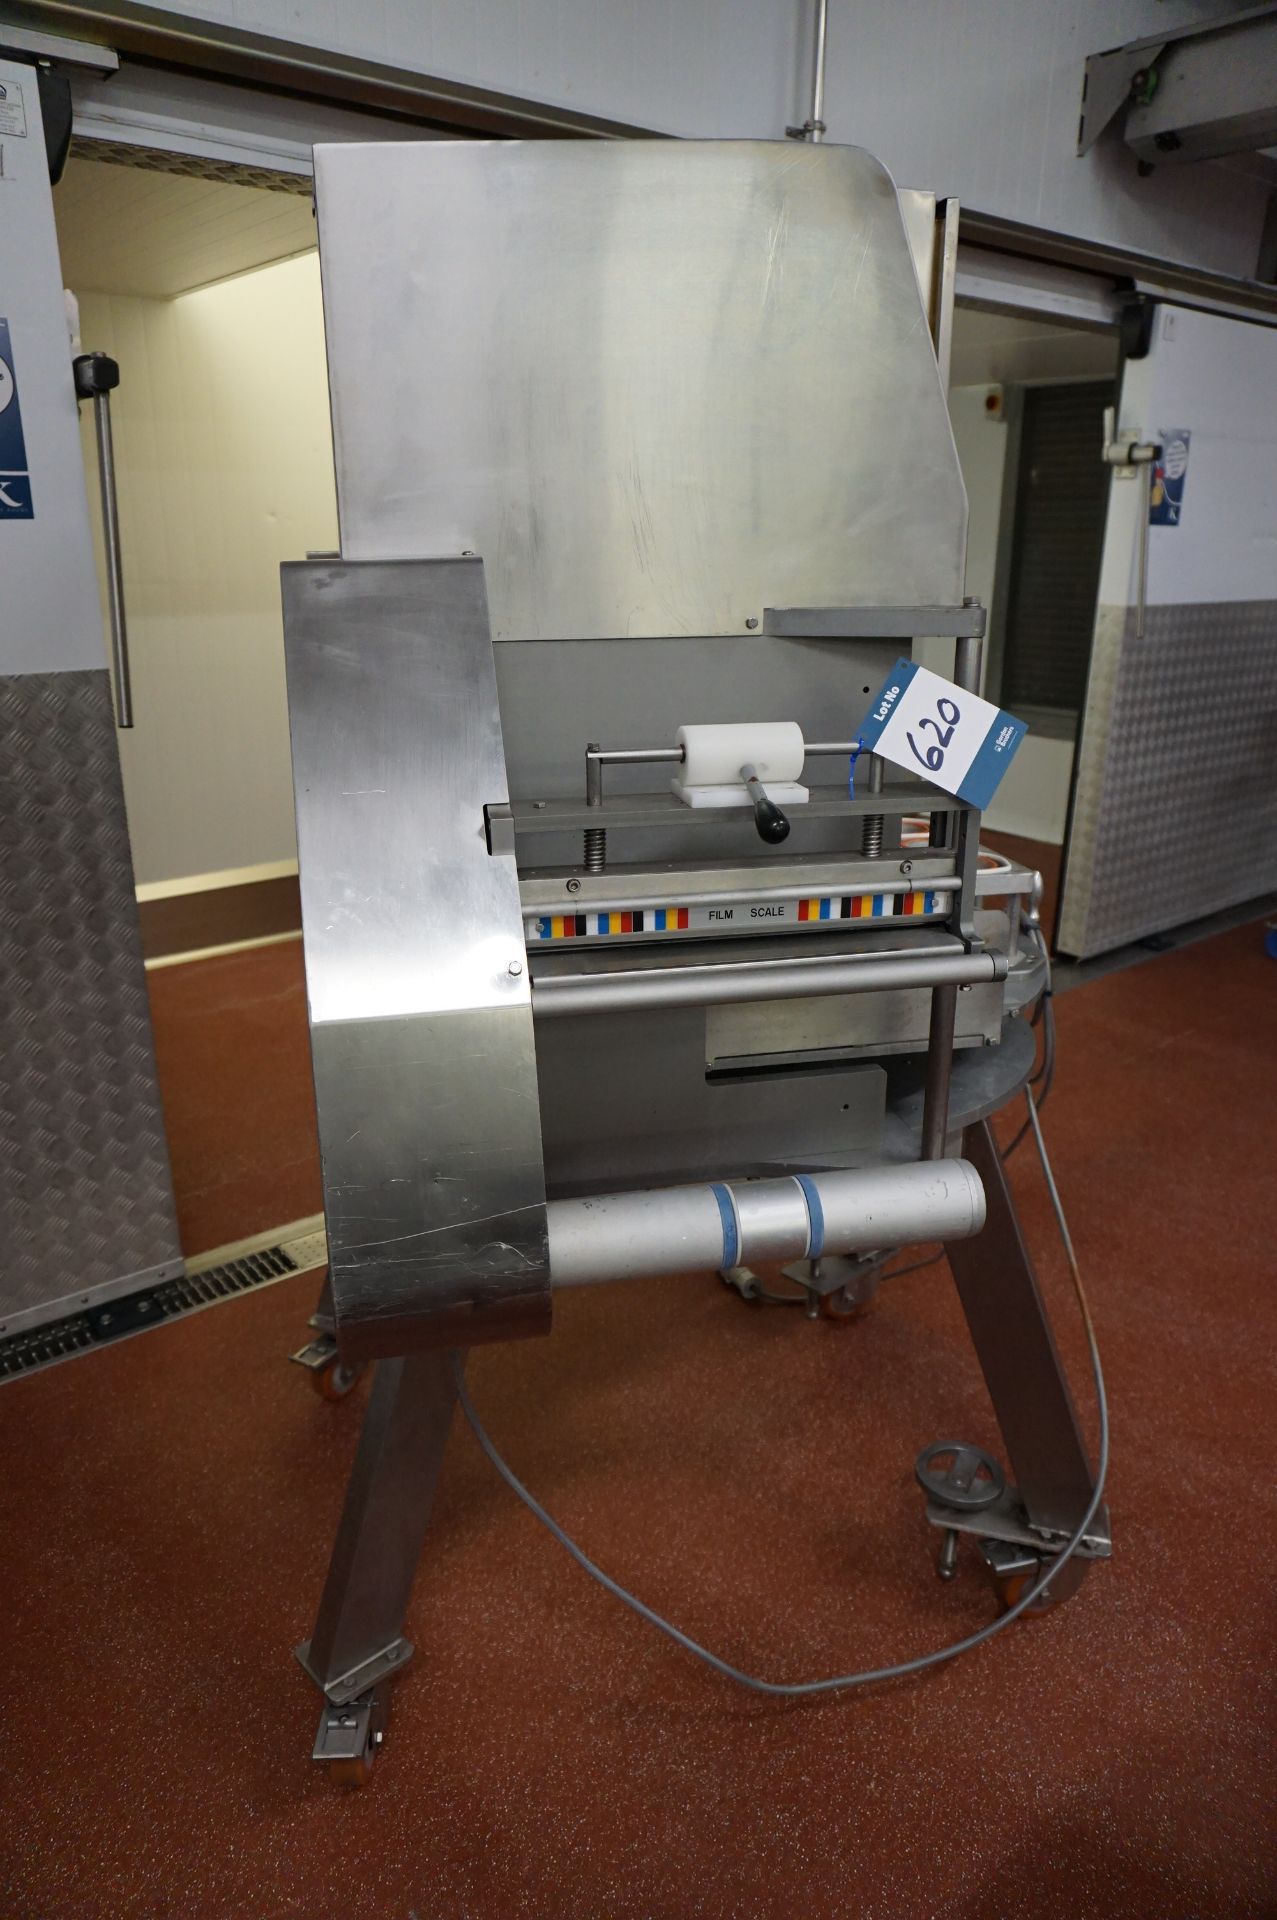 Packaging Automation Limited, mobile 6 pot sealing machine, Serial No. 170518214945 (tooling for - Image 2 of 8